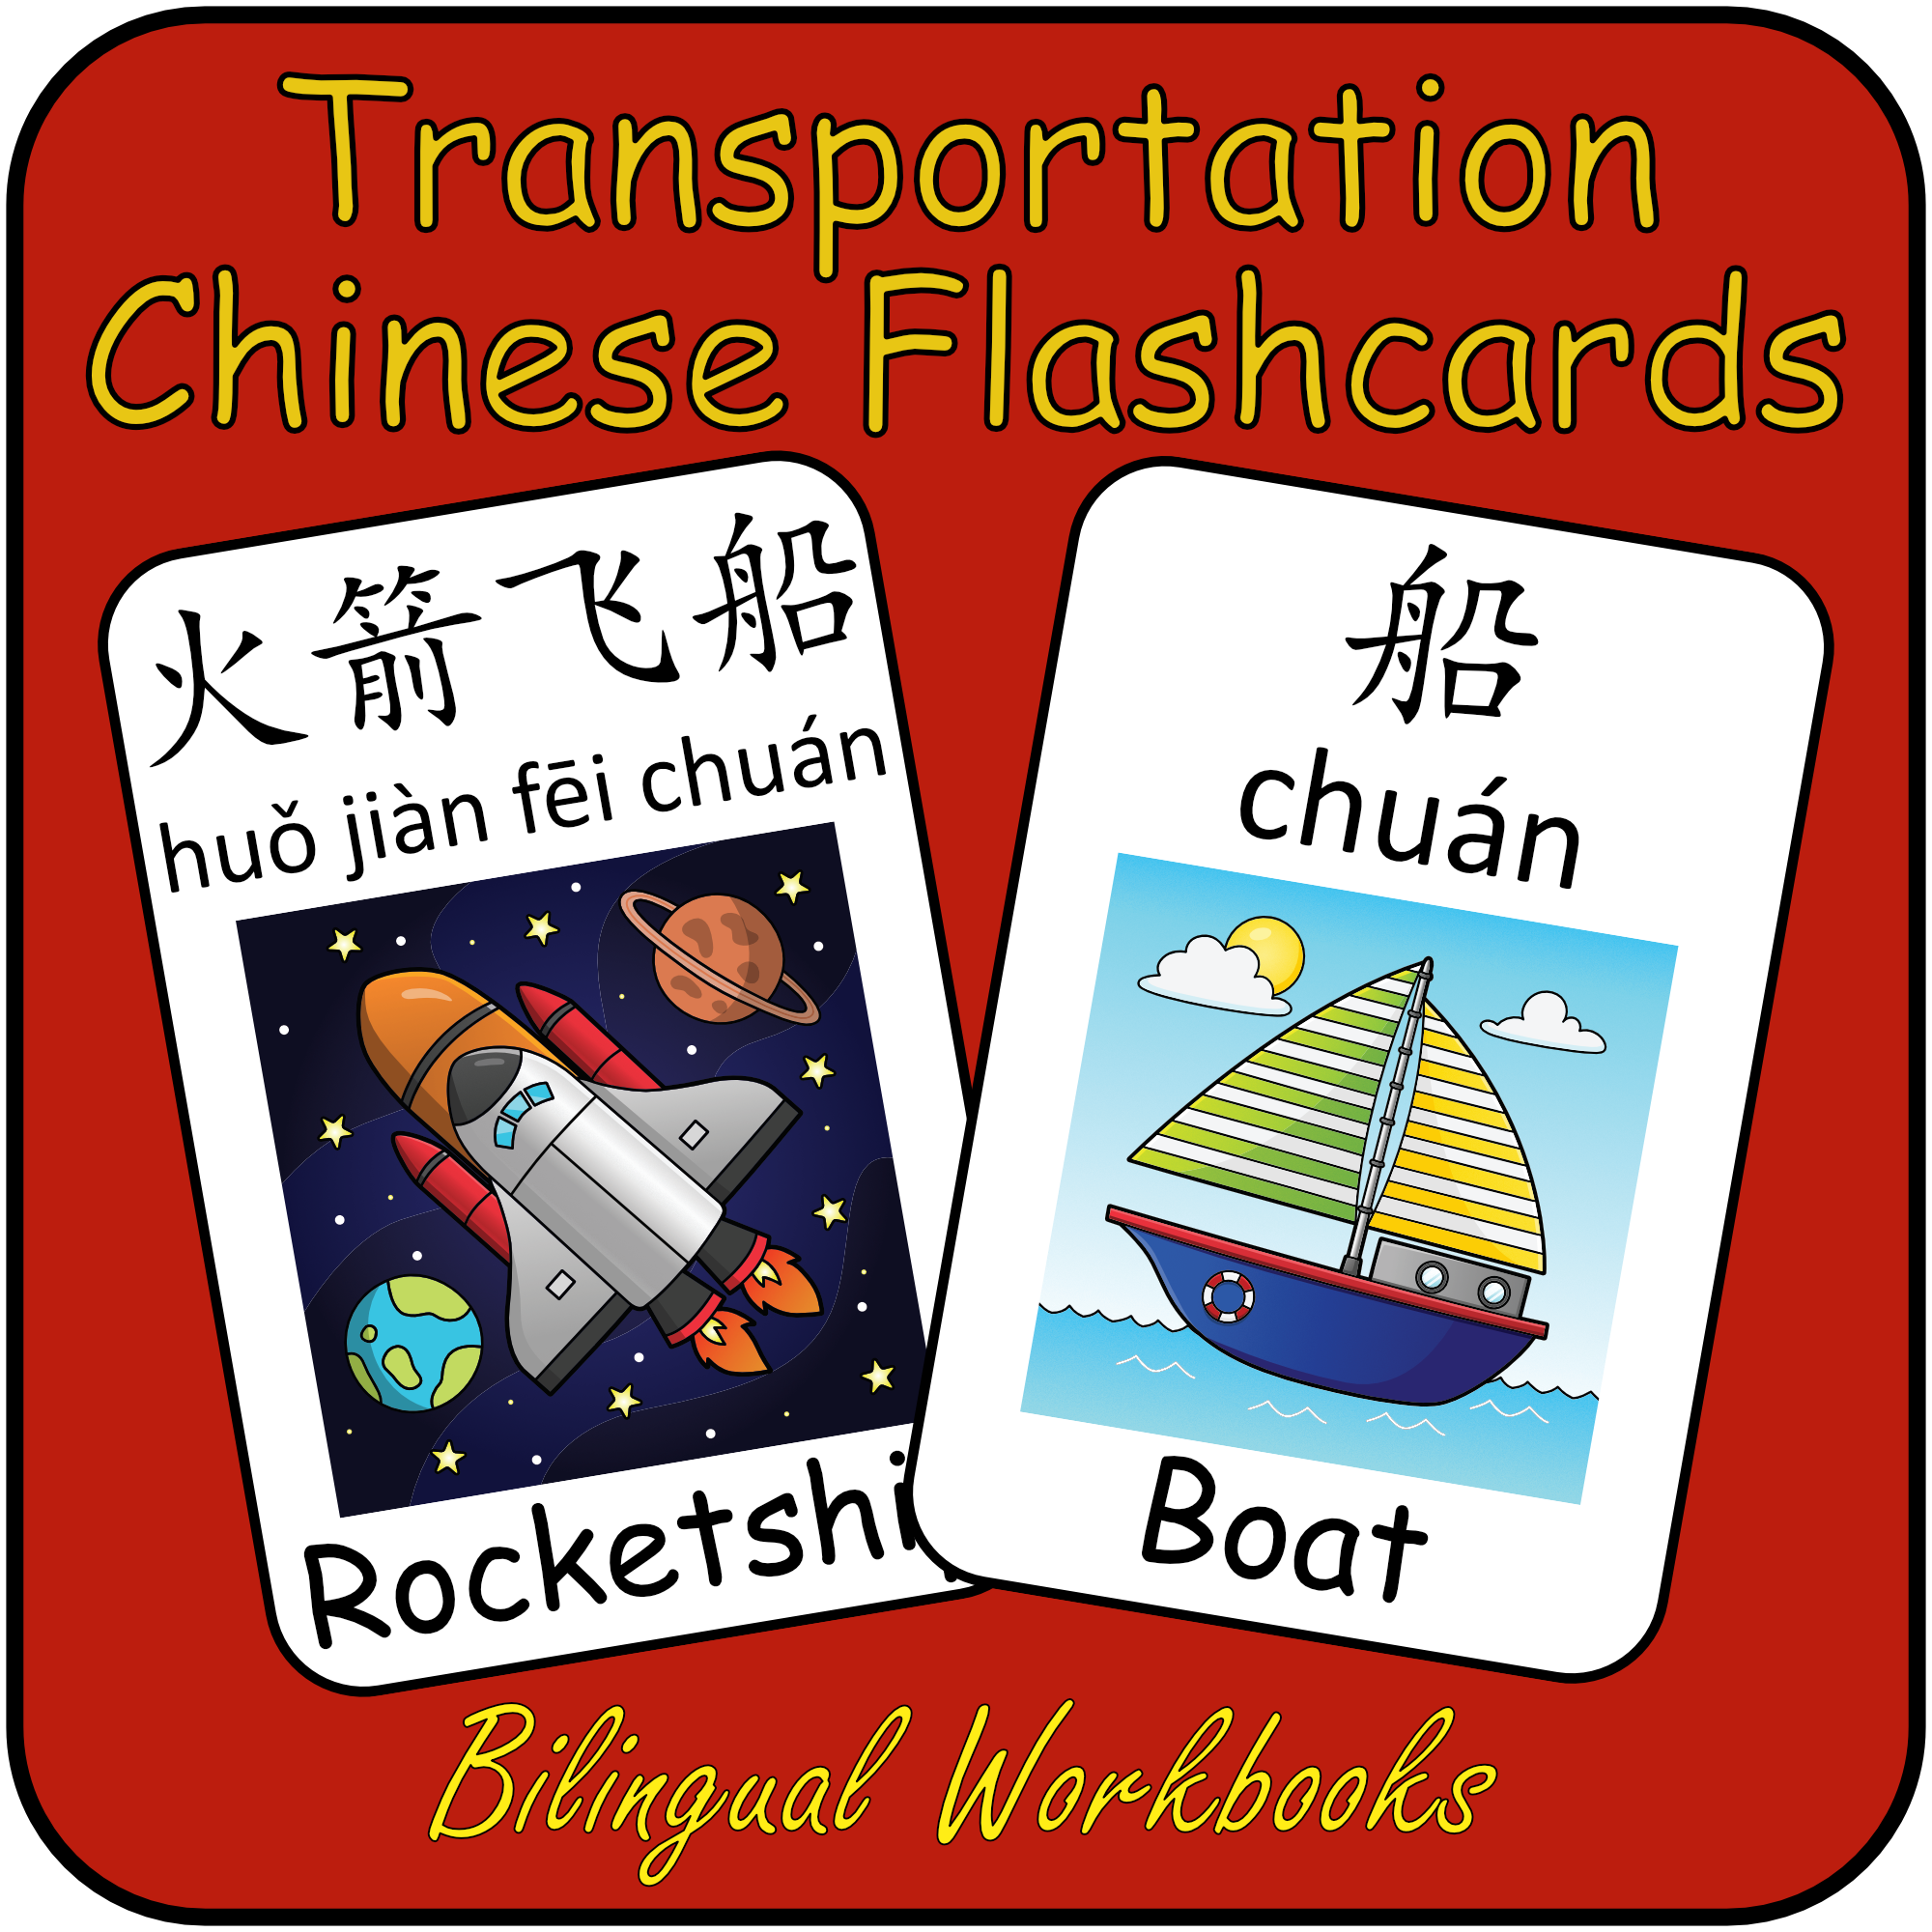 Mandarin Chinese First Words Flashcards - Transportation flash cards with English name, Simplified Character and Pinyin